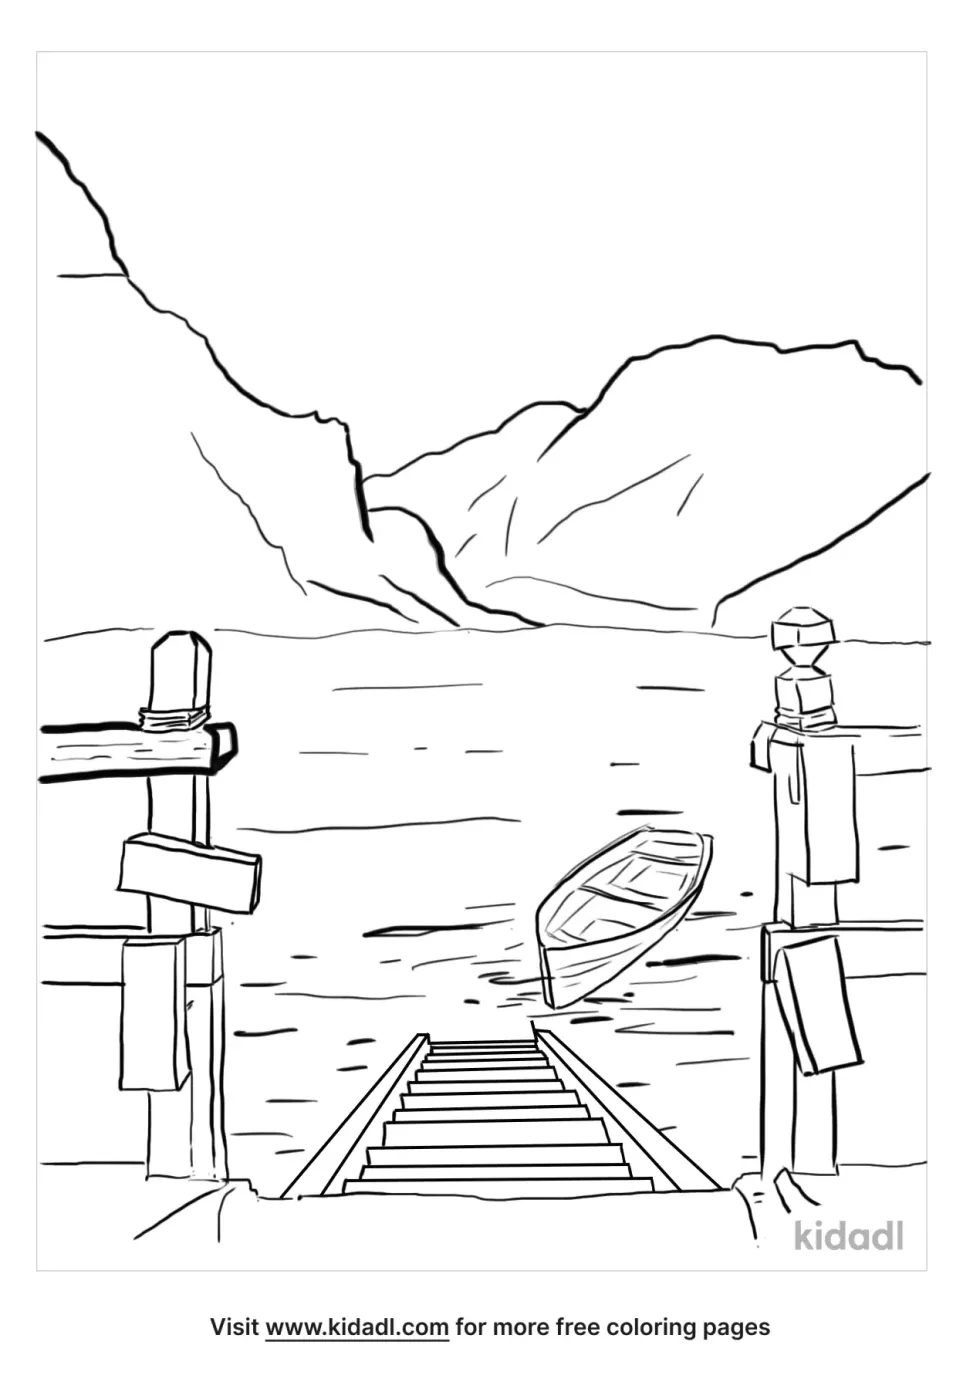 Boat In Lake Coloring Page